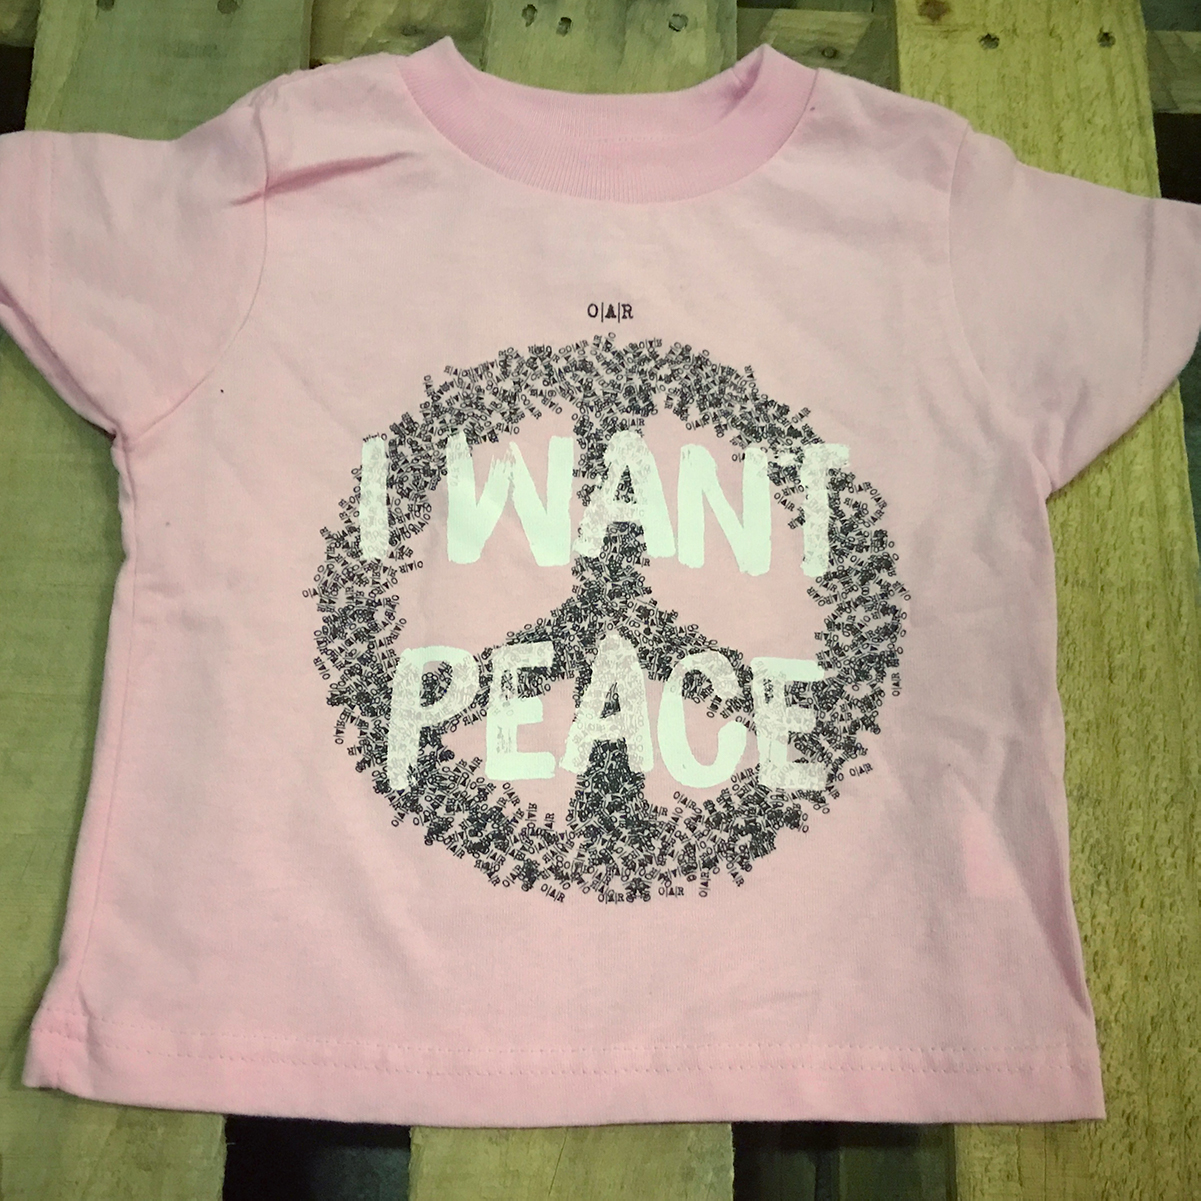 I Want Peace Youth Tee Pink